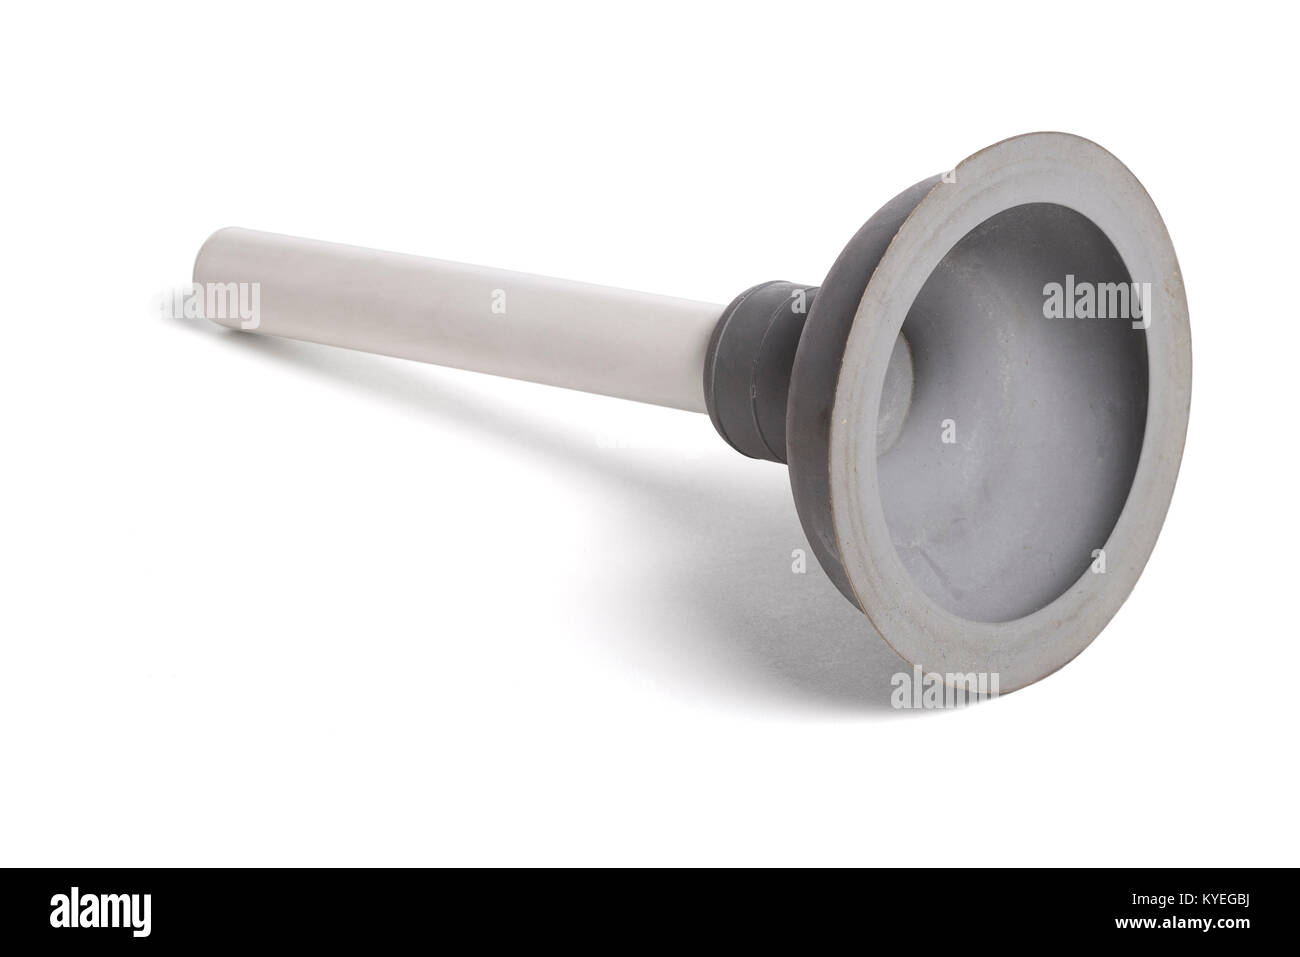 Plastic and rubber sink plunger Stock Photo